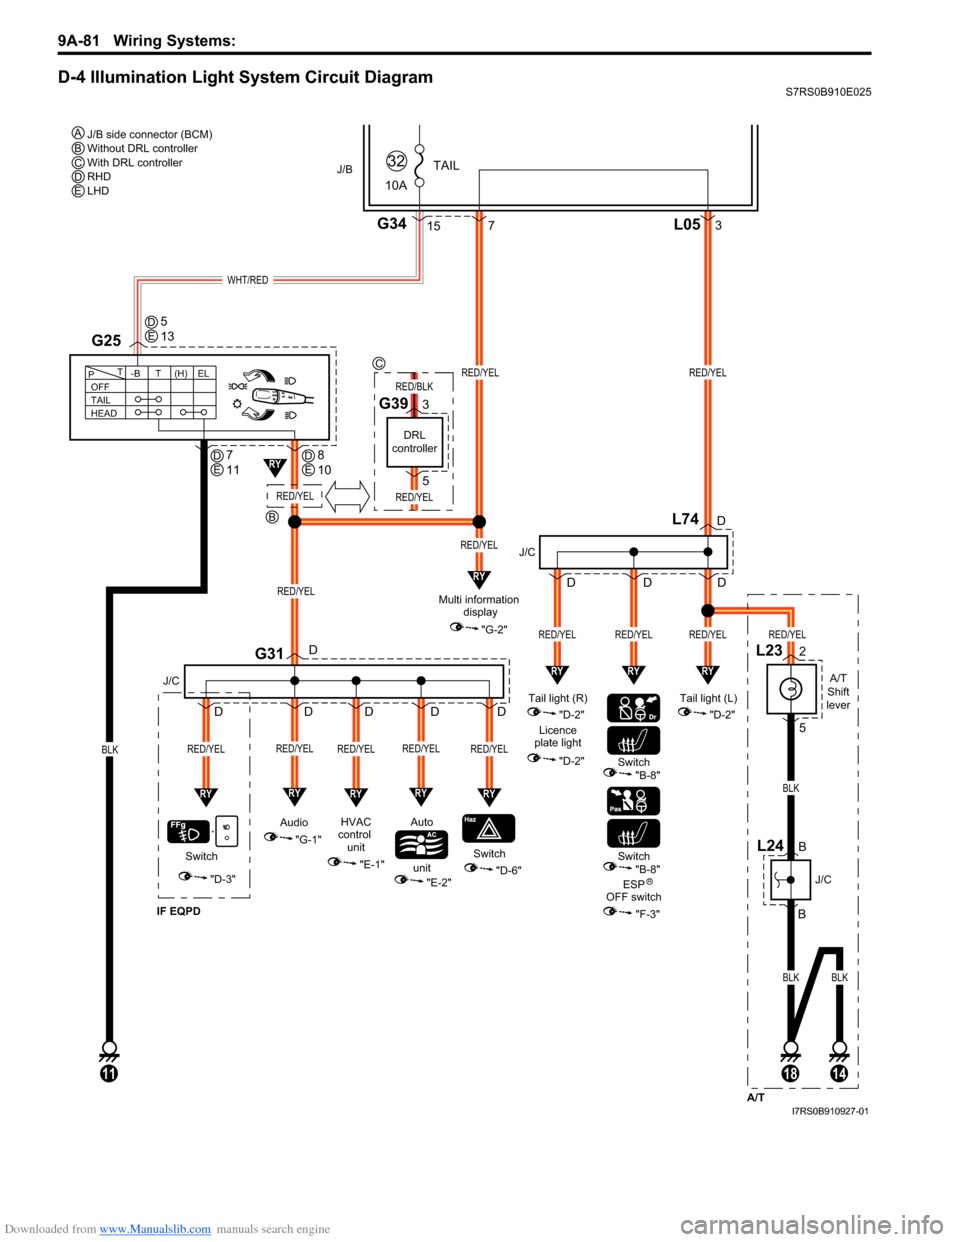 SUZUKI SWIFT 2006 2.G Service Workshop Manual Downloaded from www.Manualslib.com manuals search engine 9A-81 Wiring Systems: 
D-4 Illumination Light System Circuit DiagramS7RS0B910E025
WHT/RED
A/T
Shift
lever
L23
L742
5
BLK
BLKBLK
10A
TAIL
32J/B
